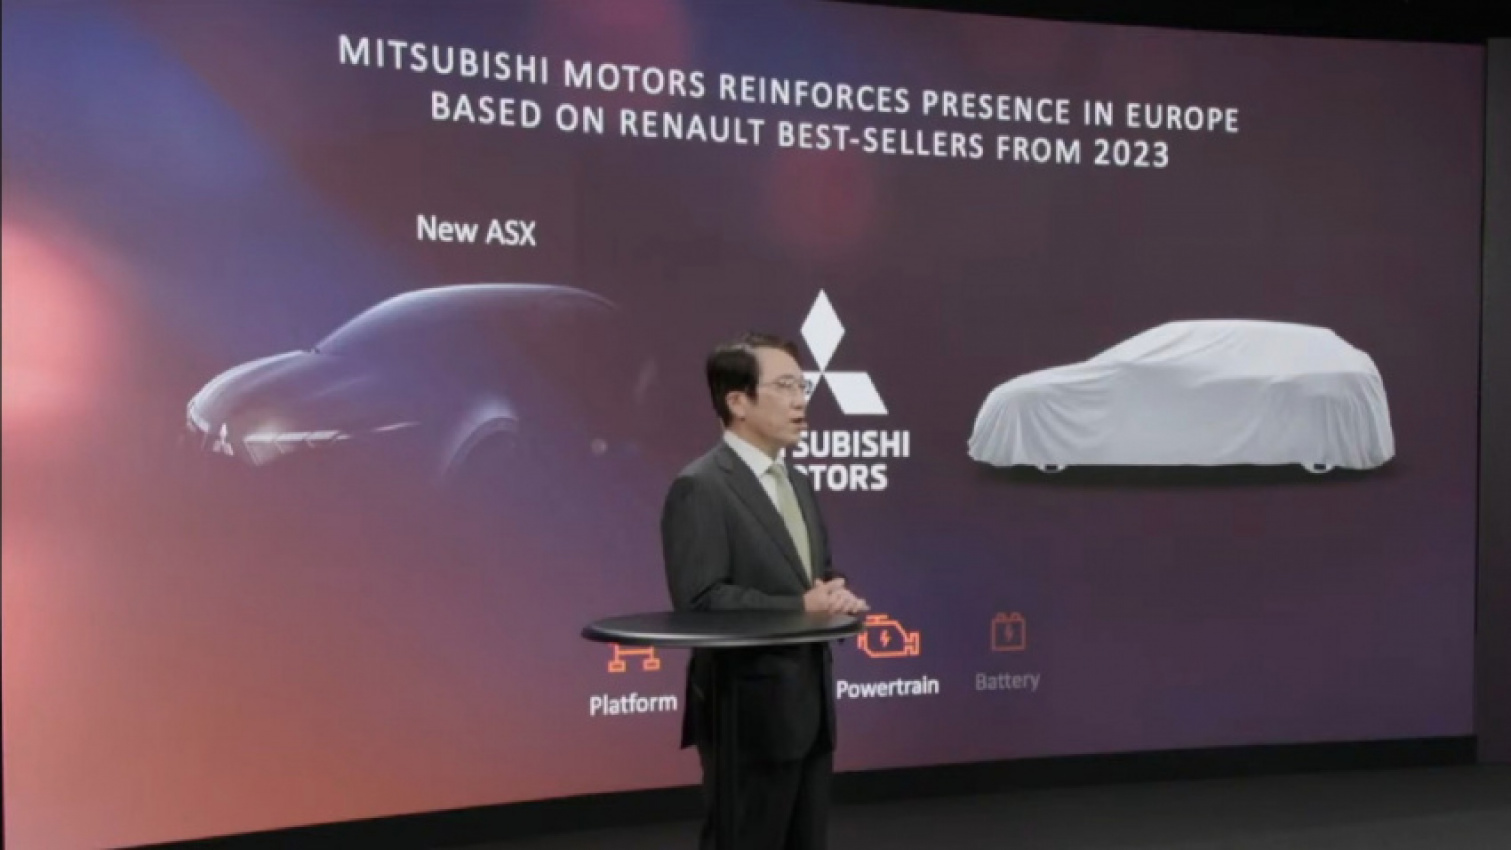 autos, cars, mitsubishi, news, nissan, renault, electric vehicles, industry, mitsubishi videos, nissan videos, renault videos, video, renault-nissan-mitsubishi alliance to unveil 35 new evs by 2030